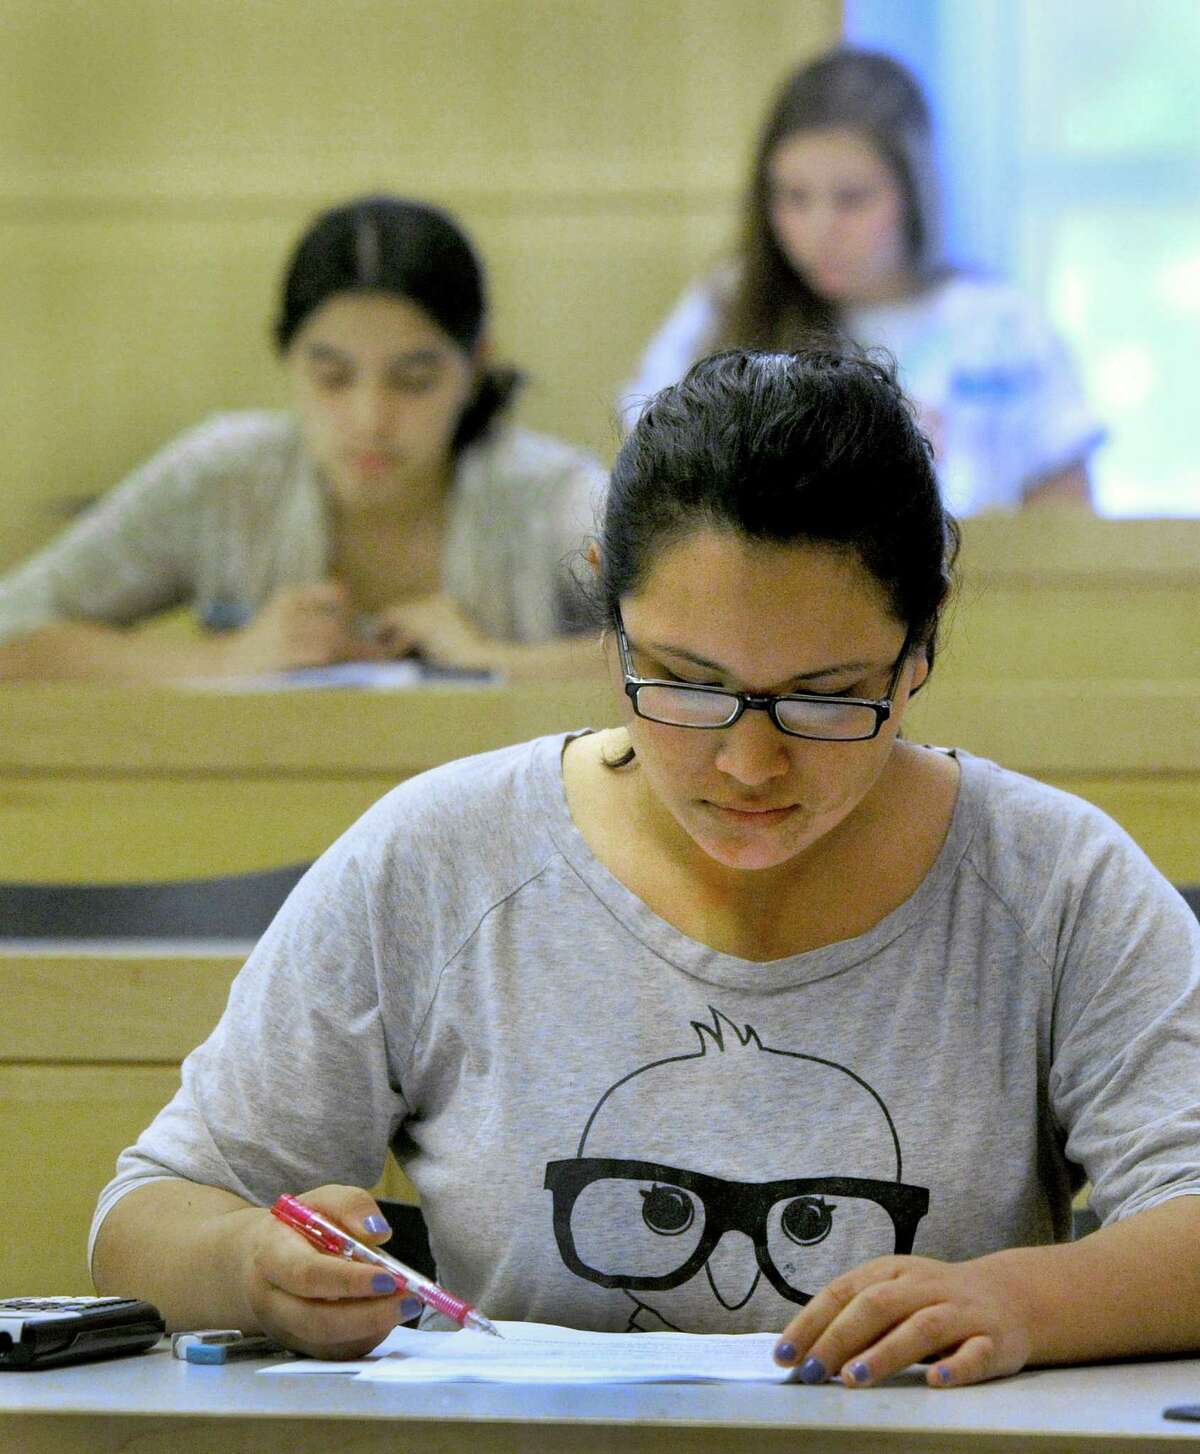 Marcia Salazar Levano, 18, takes an exam in a level 2 general chemistry class at Western Connecticut State University Thursday, July 10, 2014.